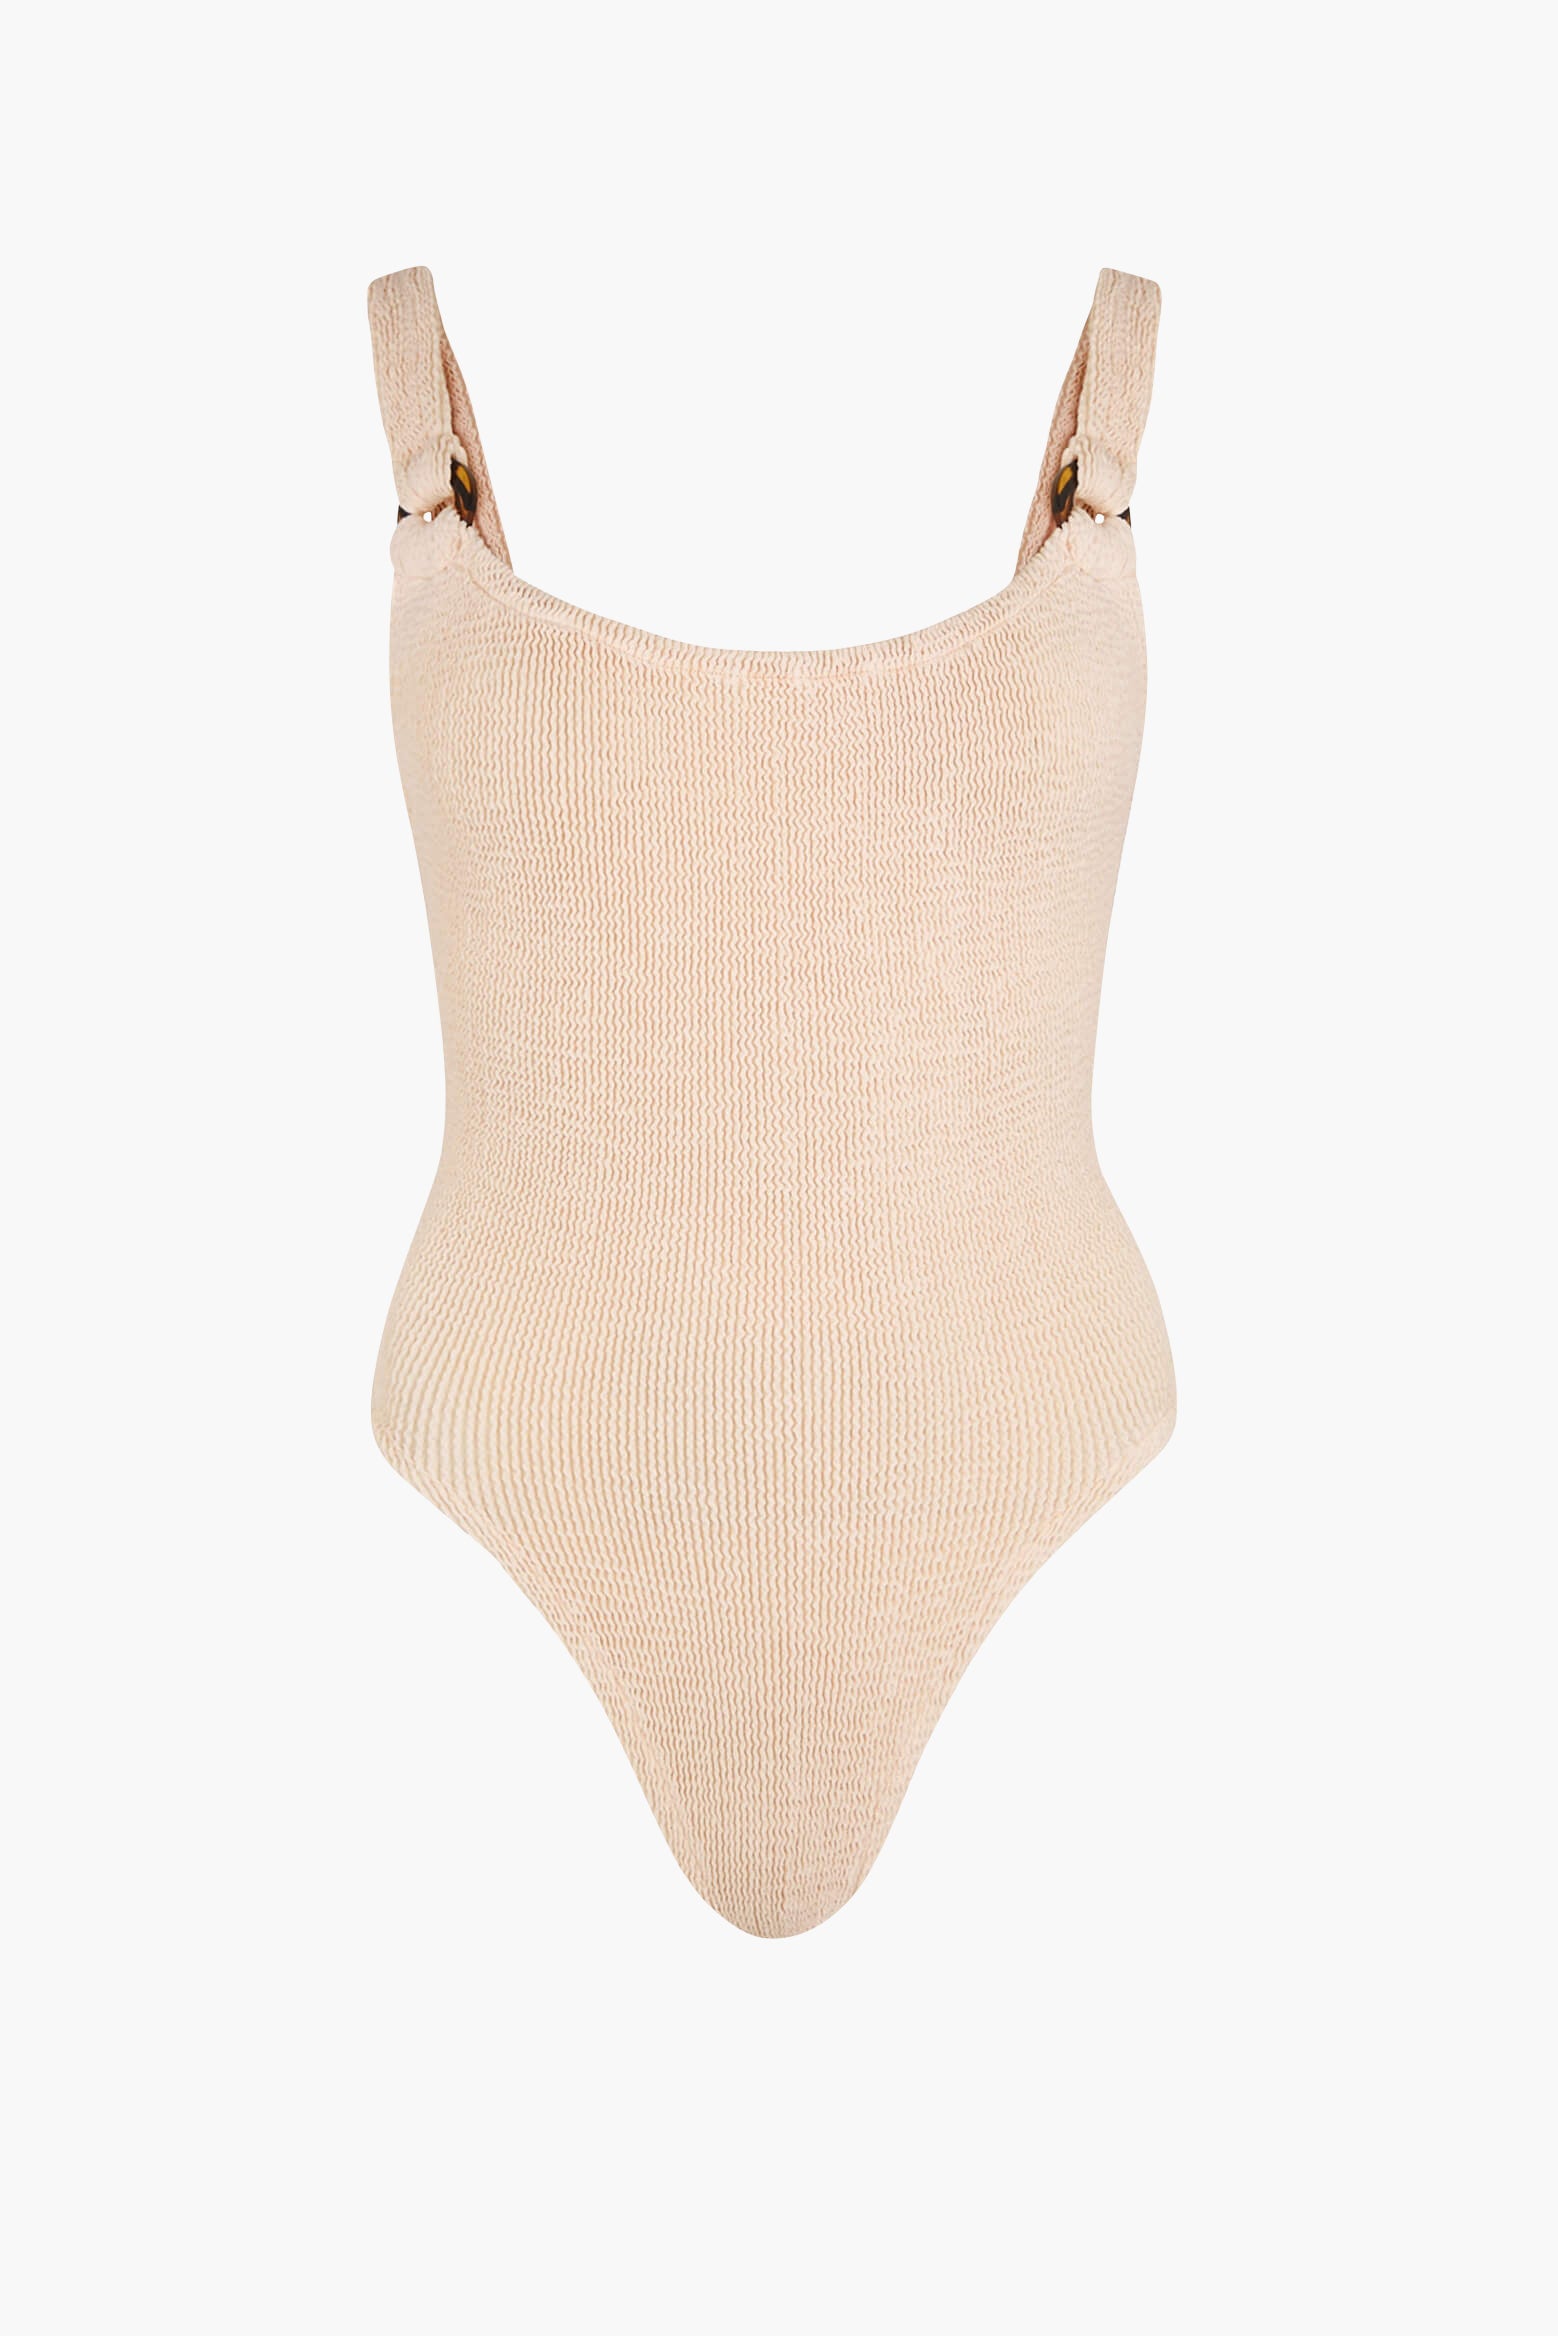 Hunza G Domino Swim in Blush from The New Trend